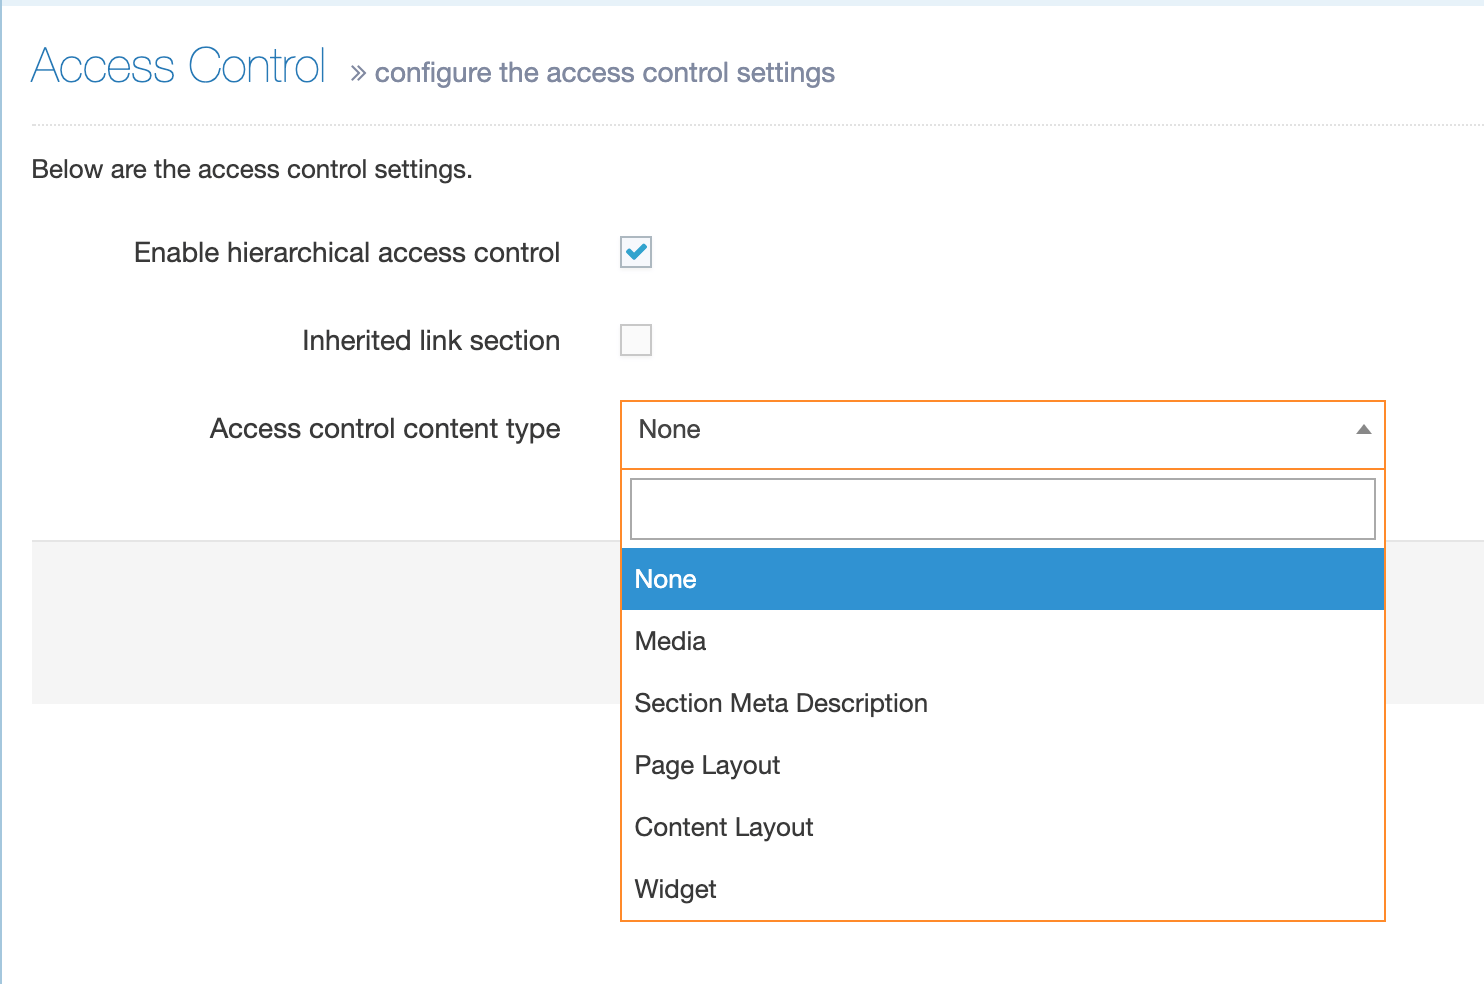 Access Control Content Types